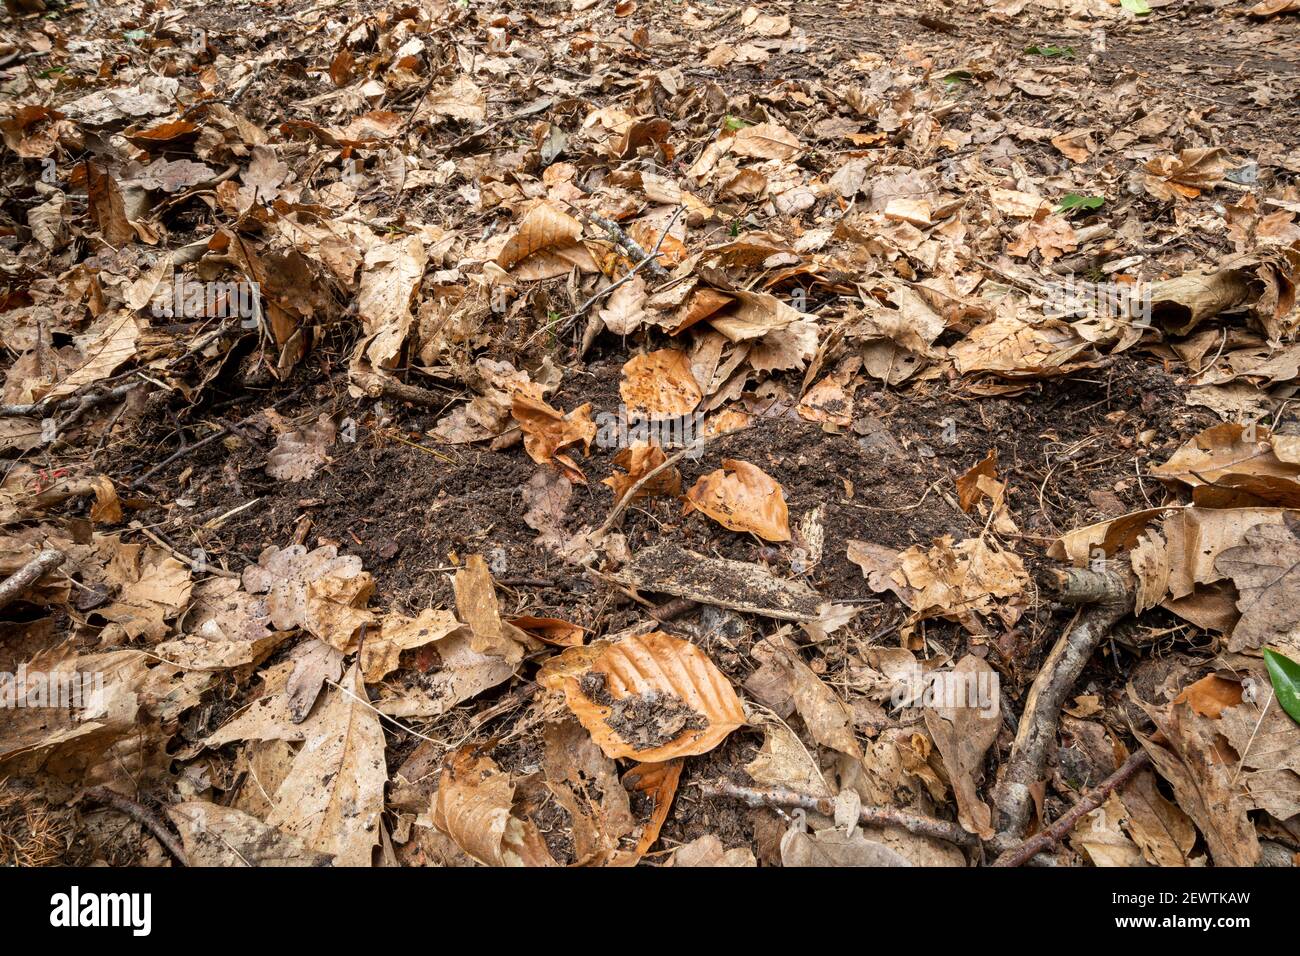 Disturbed ground near a badger sett caused by the animals snuffling or rooting around in the soil under leaves for worms, UK woodland animal signs Stock Photo